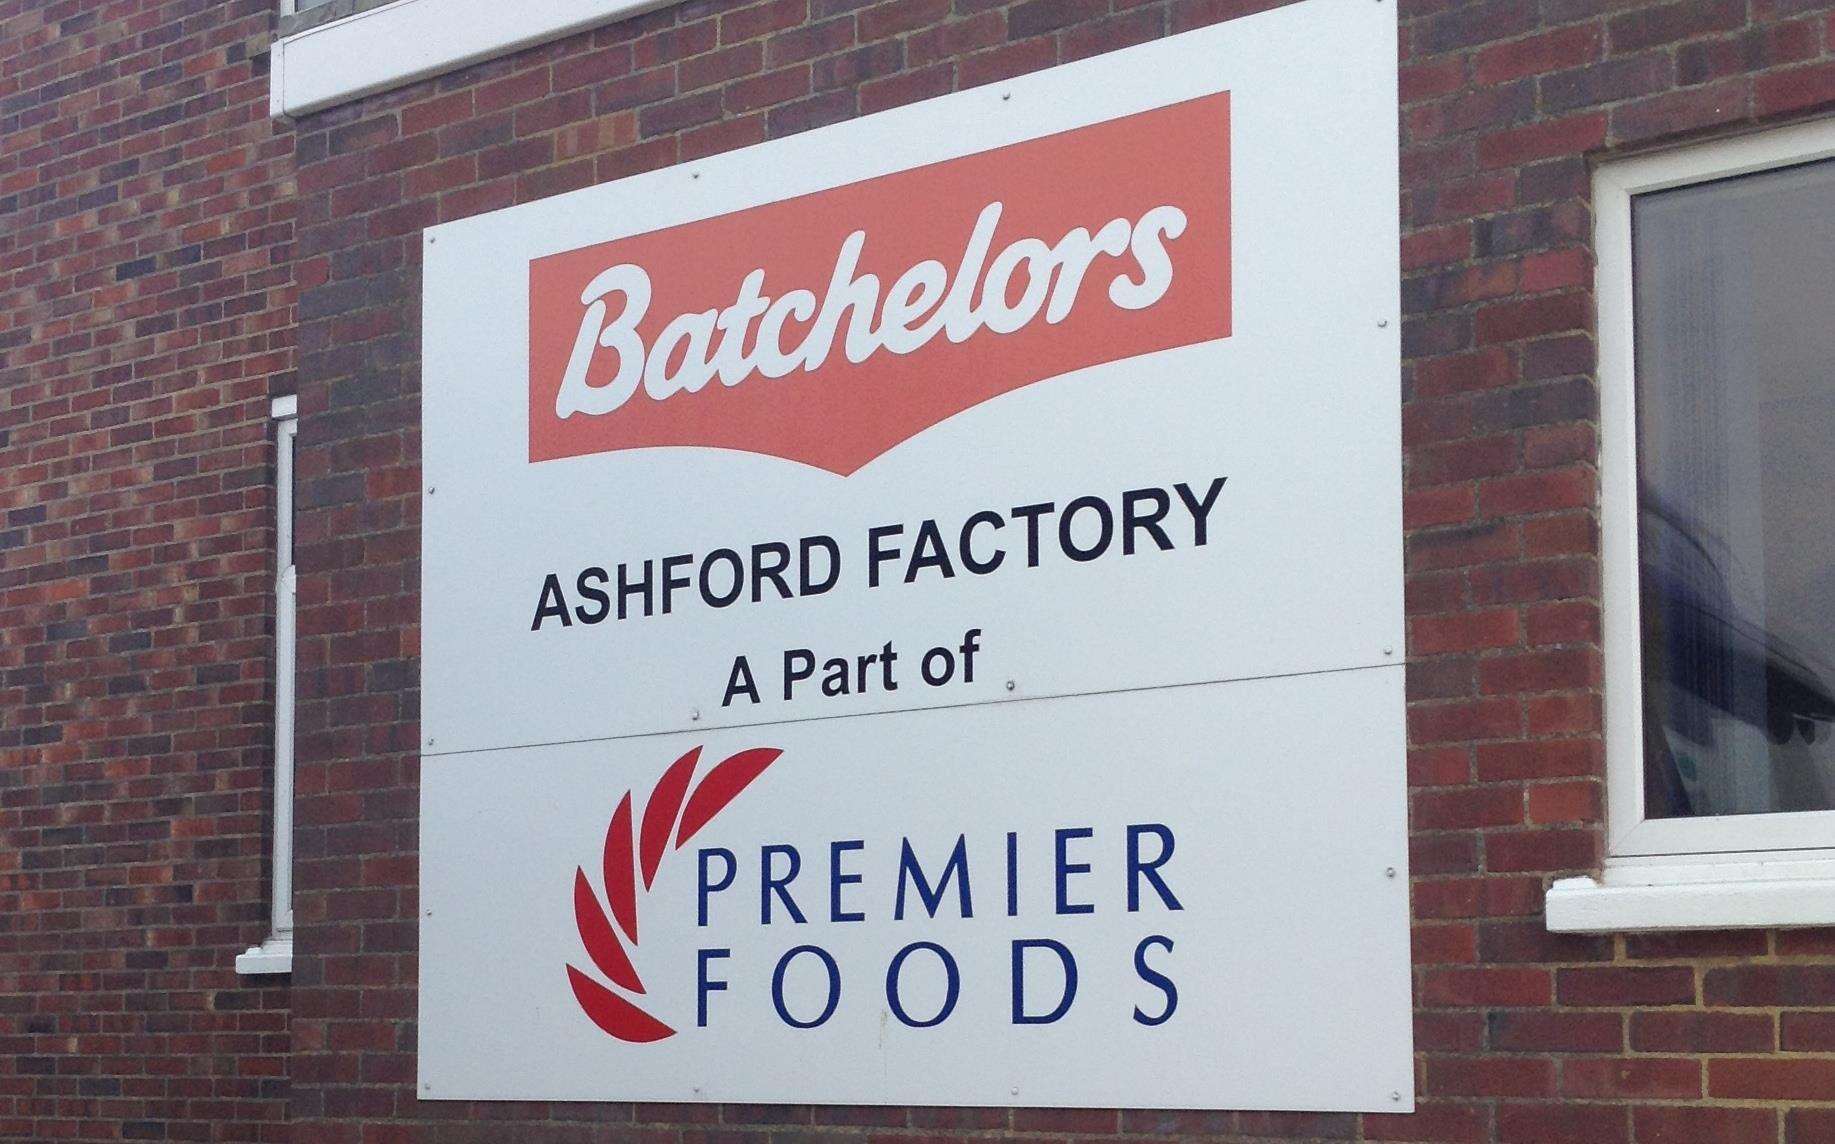 The Batchelors Cup a Soup factory in Ashford is part of the Premier Foods group